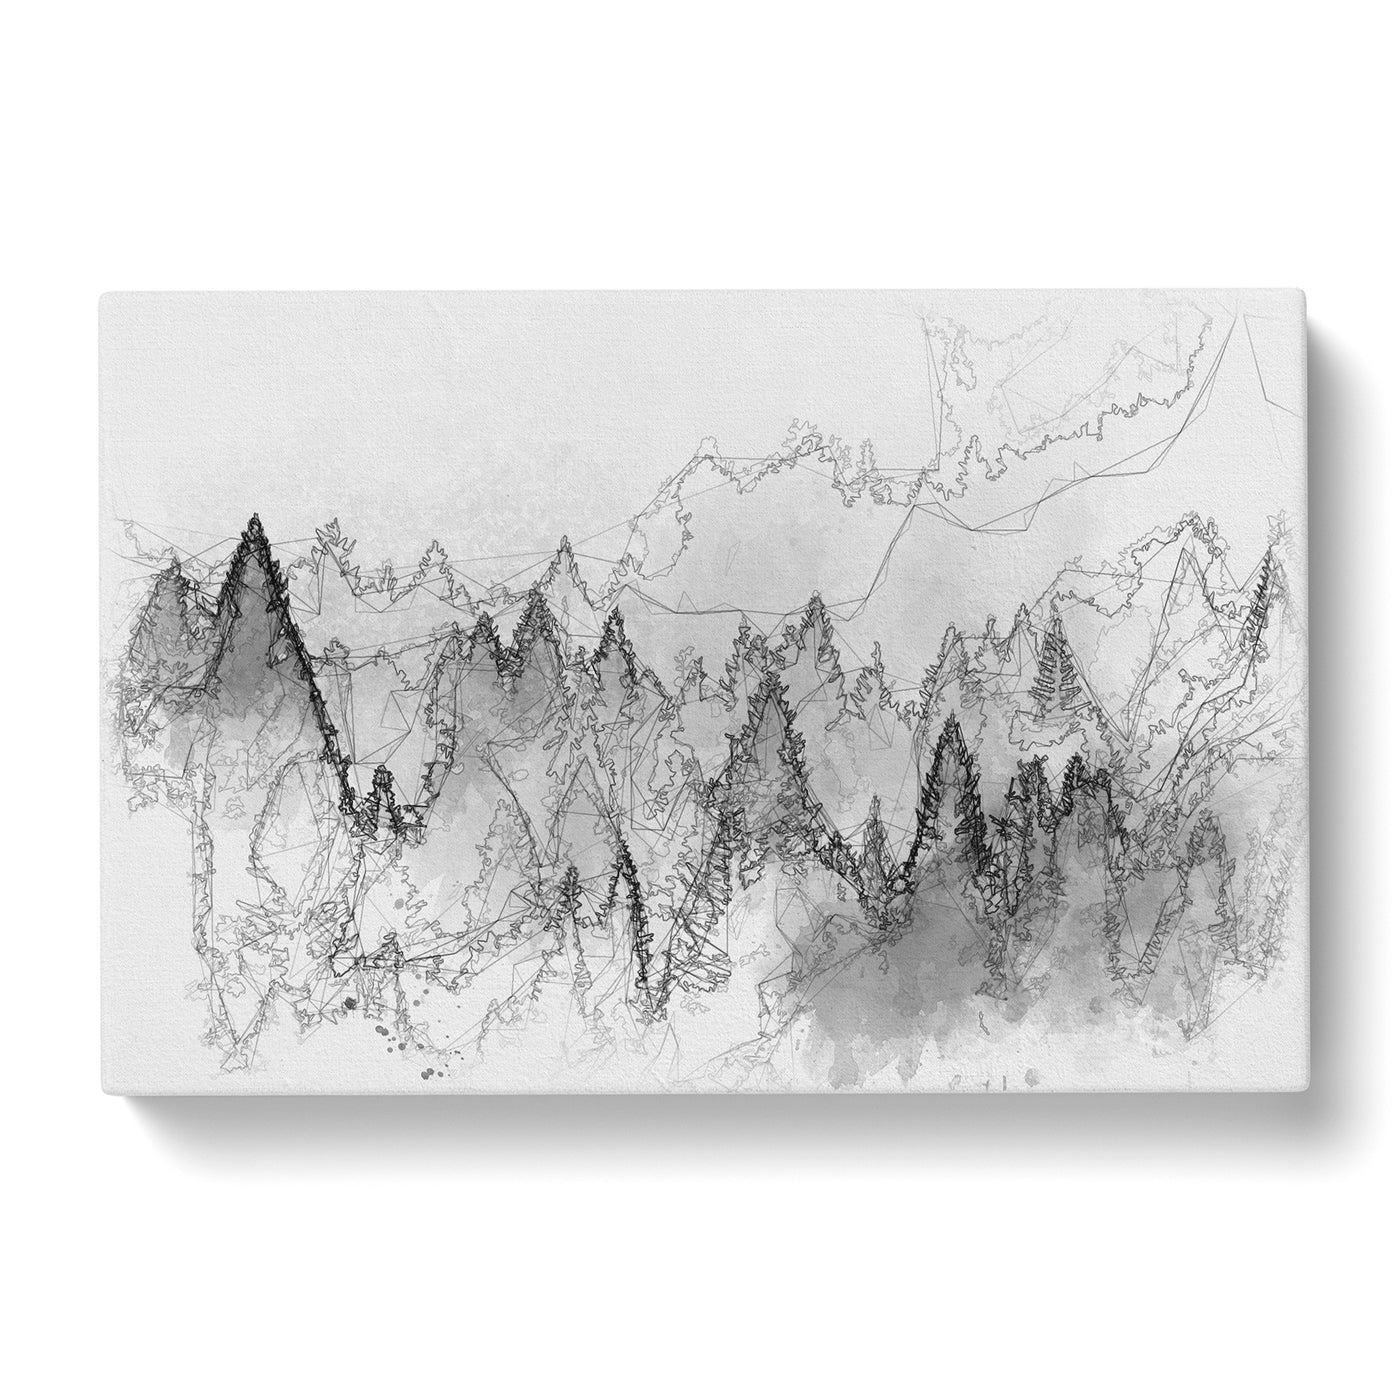 The Misty Forest Sketch Canvas Print Main Image